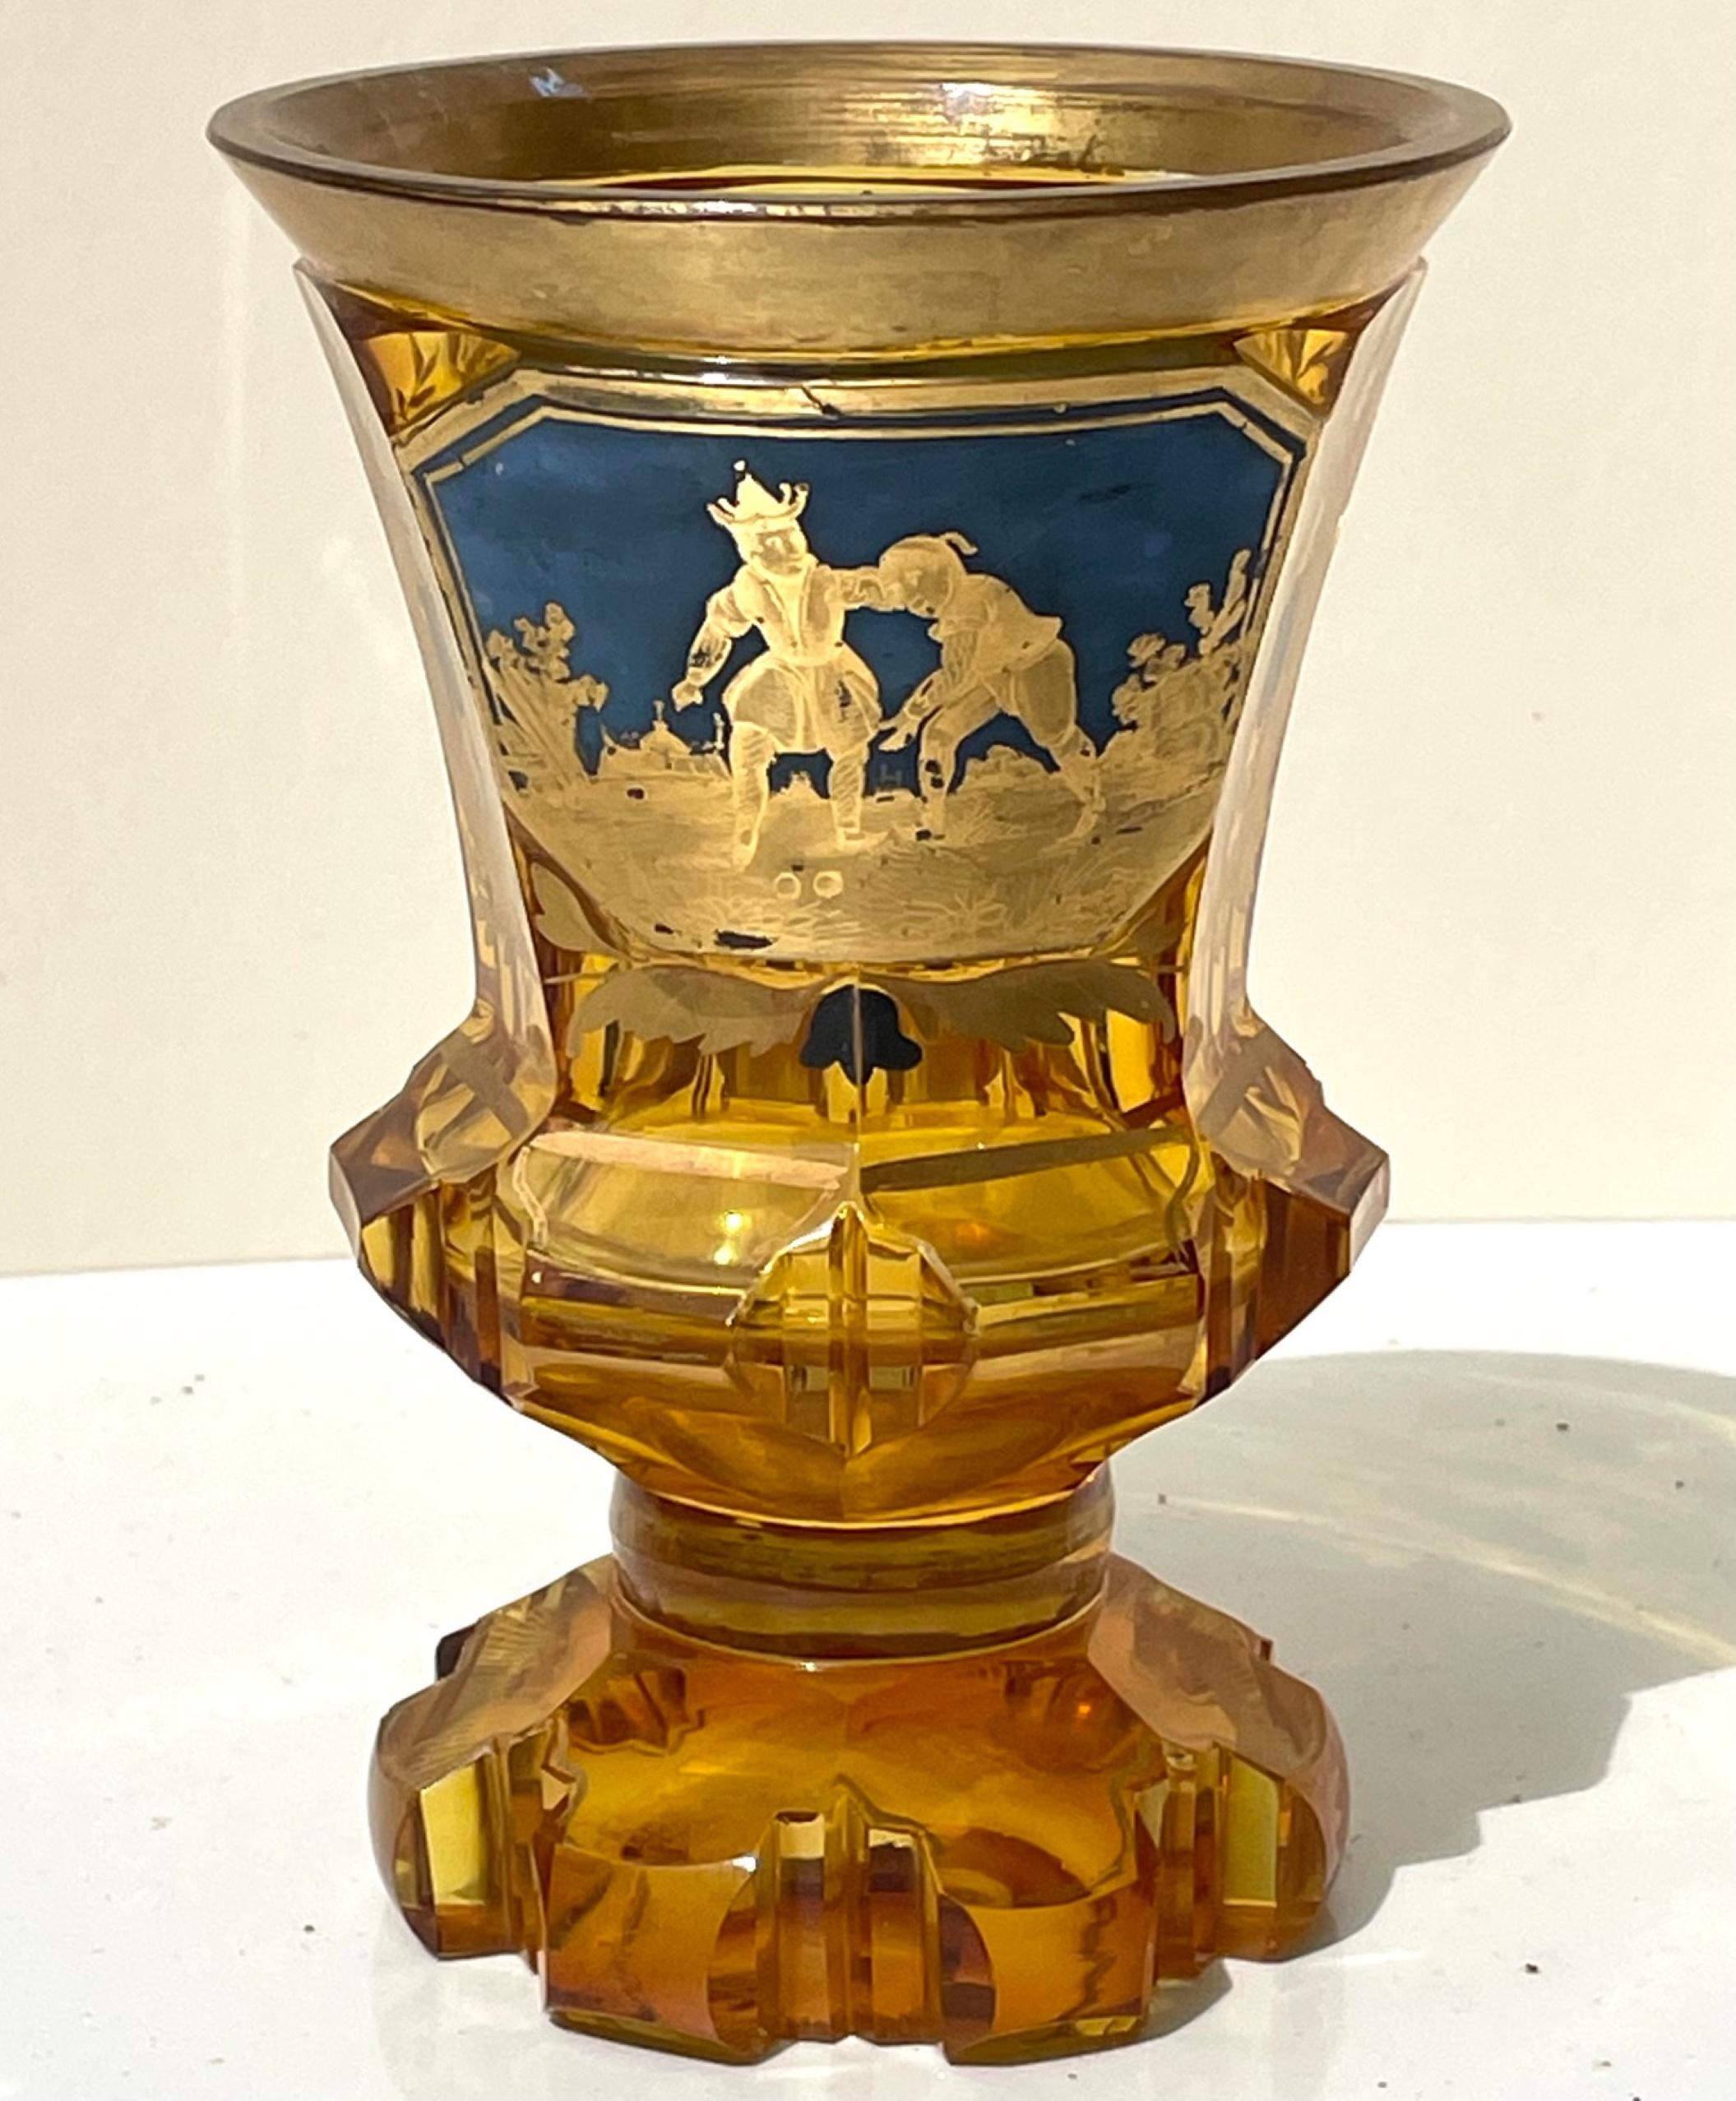 19th century gold gilded bohemian amber glass enamel cut goblet. 

Glowing amber vessel with gilded rims and incised designs on foot and terraced stem. Highly stylized piece in with a blue enamel painted and cut gold gilded cartouche in